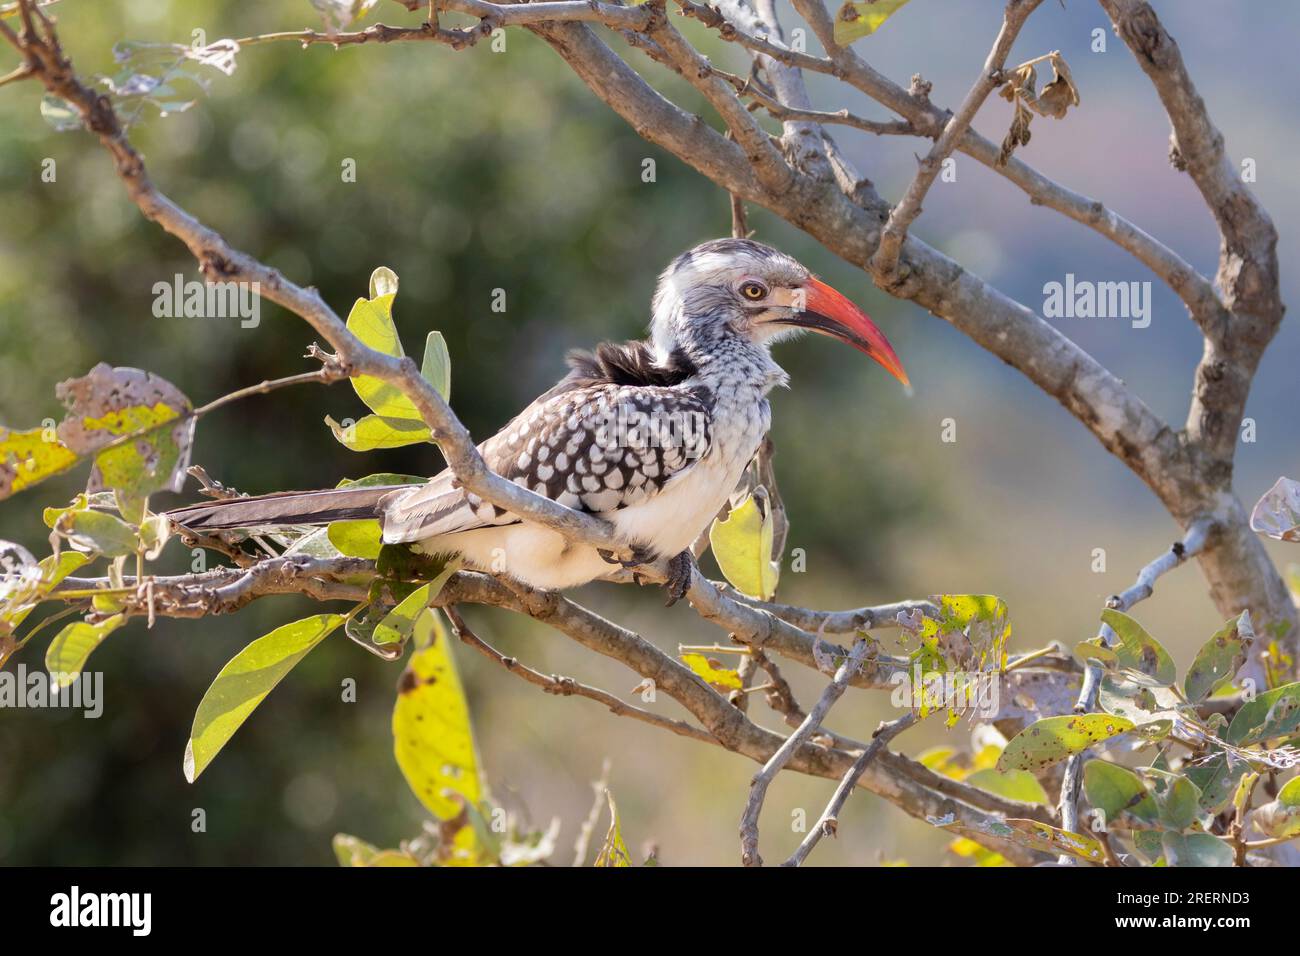 Southern Red-billed Hornbill (Tockus rufirostris) in broad-leaf woodland habitat Limpopo, South Africa Stock Photo